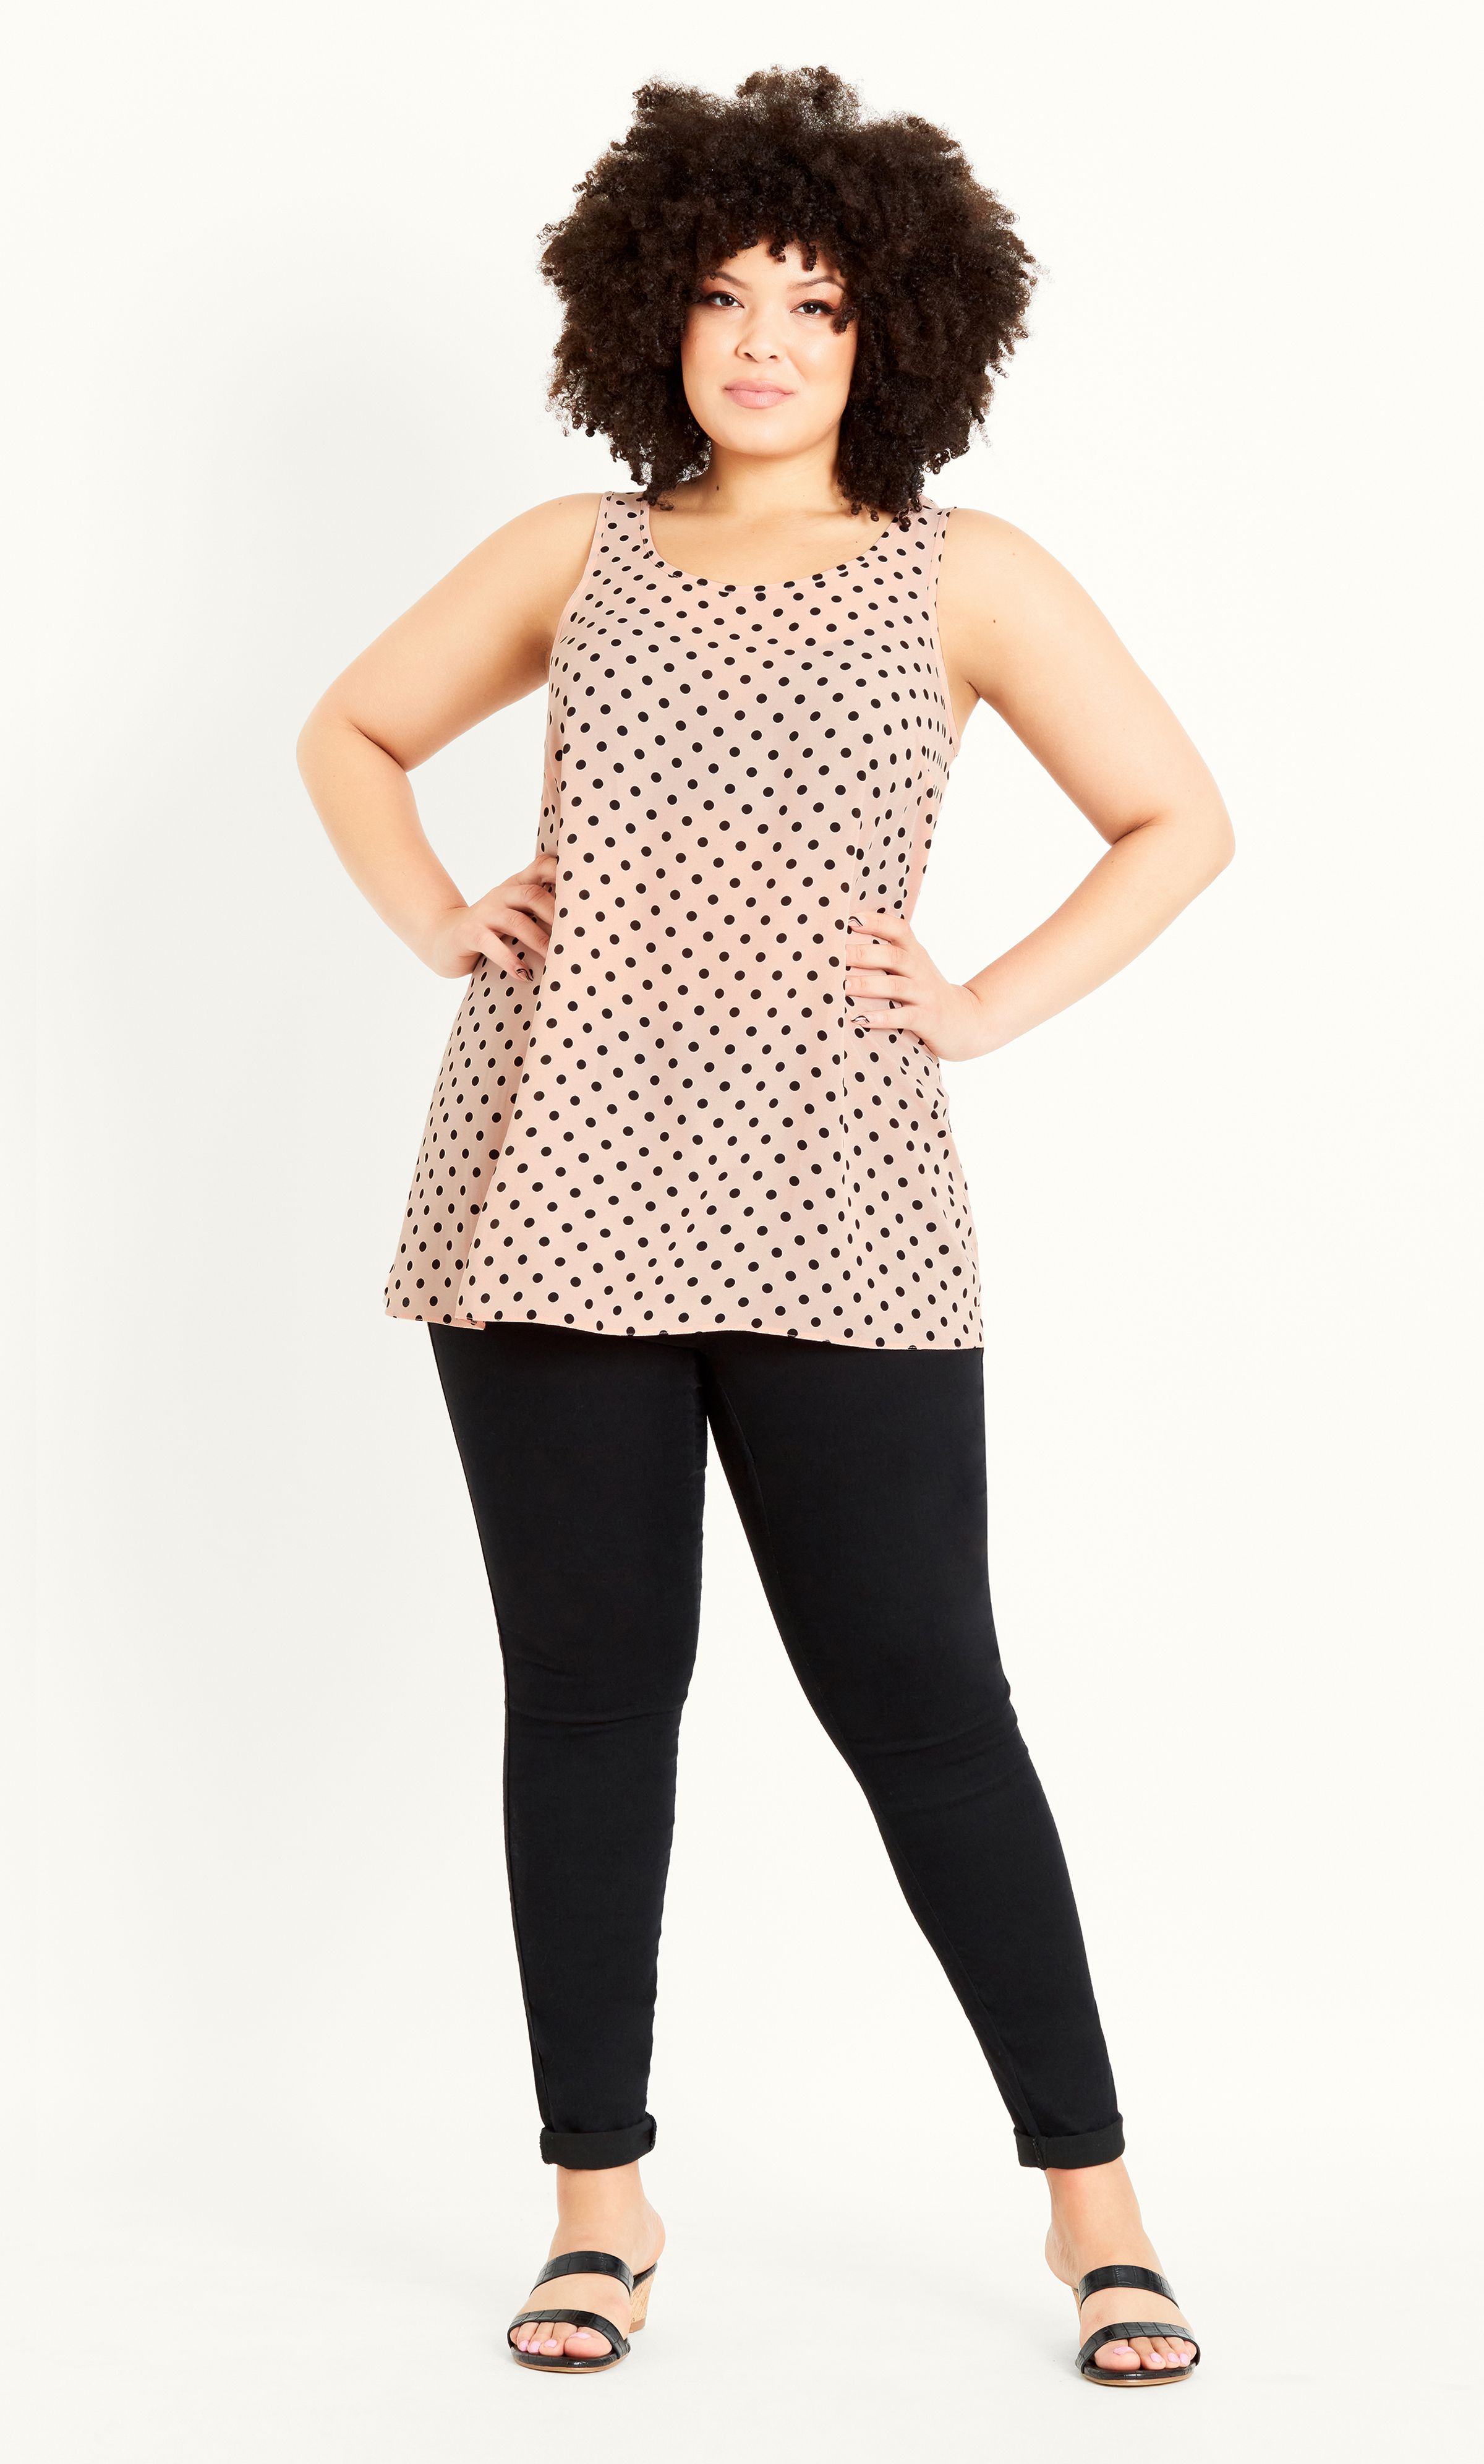 Super cute and effortless, the Spot Print Vest is a playful addition to your summer collection. With a blush pink hue and slightly flared silhouette, this top will drape over your curves effortlessly, keeping you breezy and stylish at the same time! Key Features Include: - Scoop neckline - Sleeveless - Lightweight non-stretch fabrication - Slightly flared silhouette - Unlined - Relaxed fit - Pull over style - Hip length Wear with frayed mini shorts, wedges and a pair of gold hoops for upstyled Saturday styling!